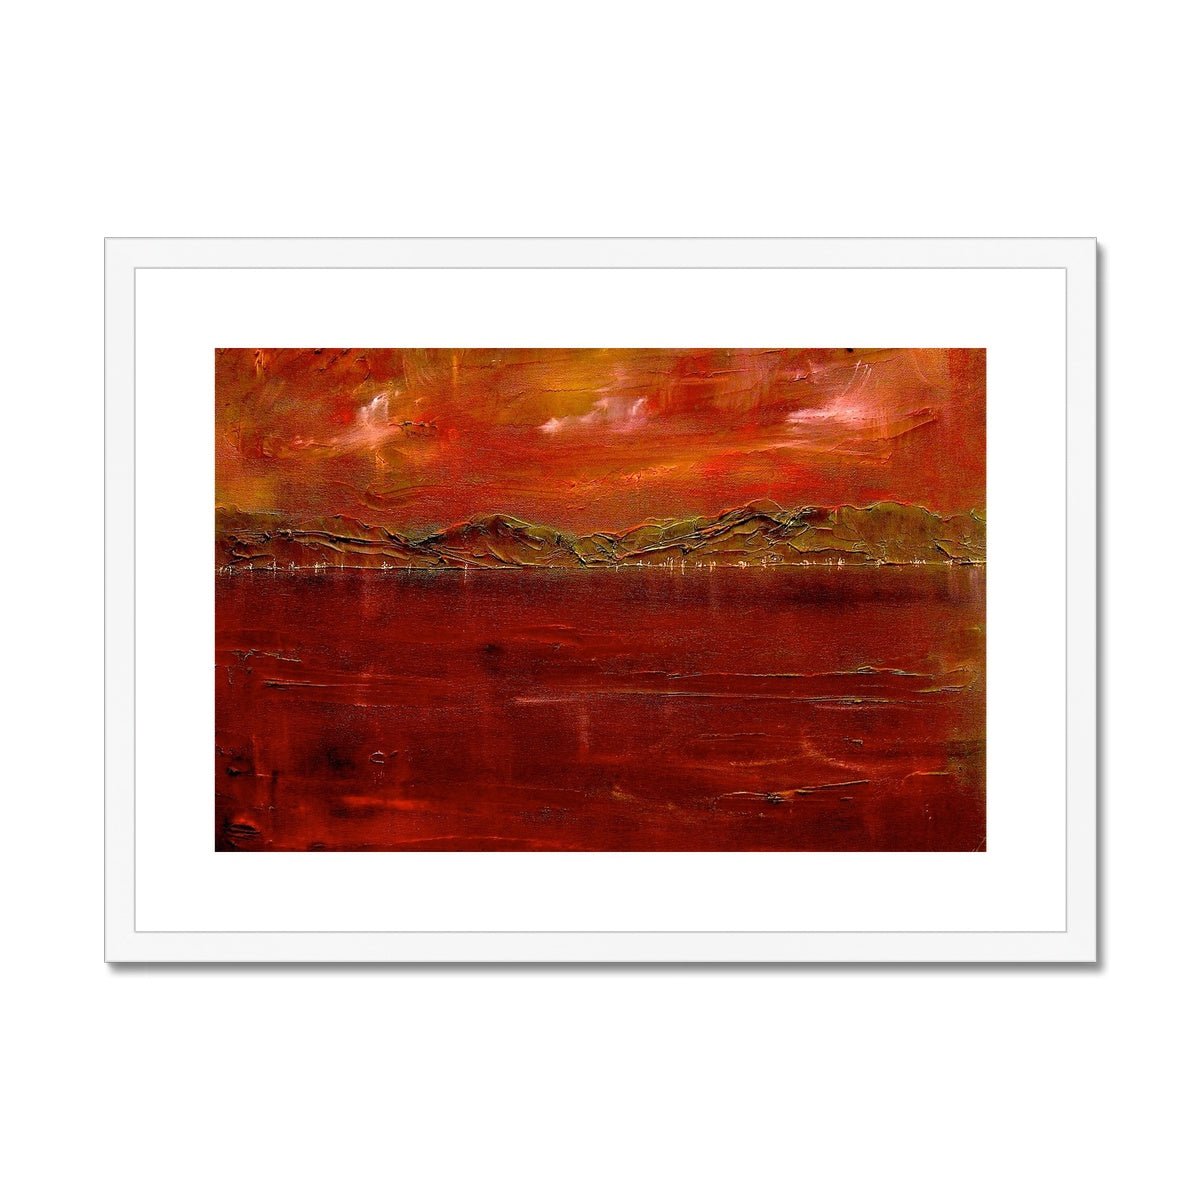 Deep Clyde Dusk Painting | Framed & Mounted Prints From Scotland-Framed & Mounted Prints-River Clyde Art Gallery-A2 Landscape-White Frame-Paintings, Prints, Homeware, Art Gifts From Scotland By Scottish Artist Kevin Hunter